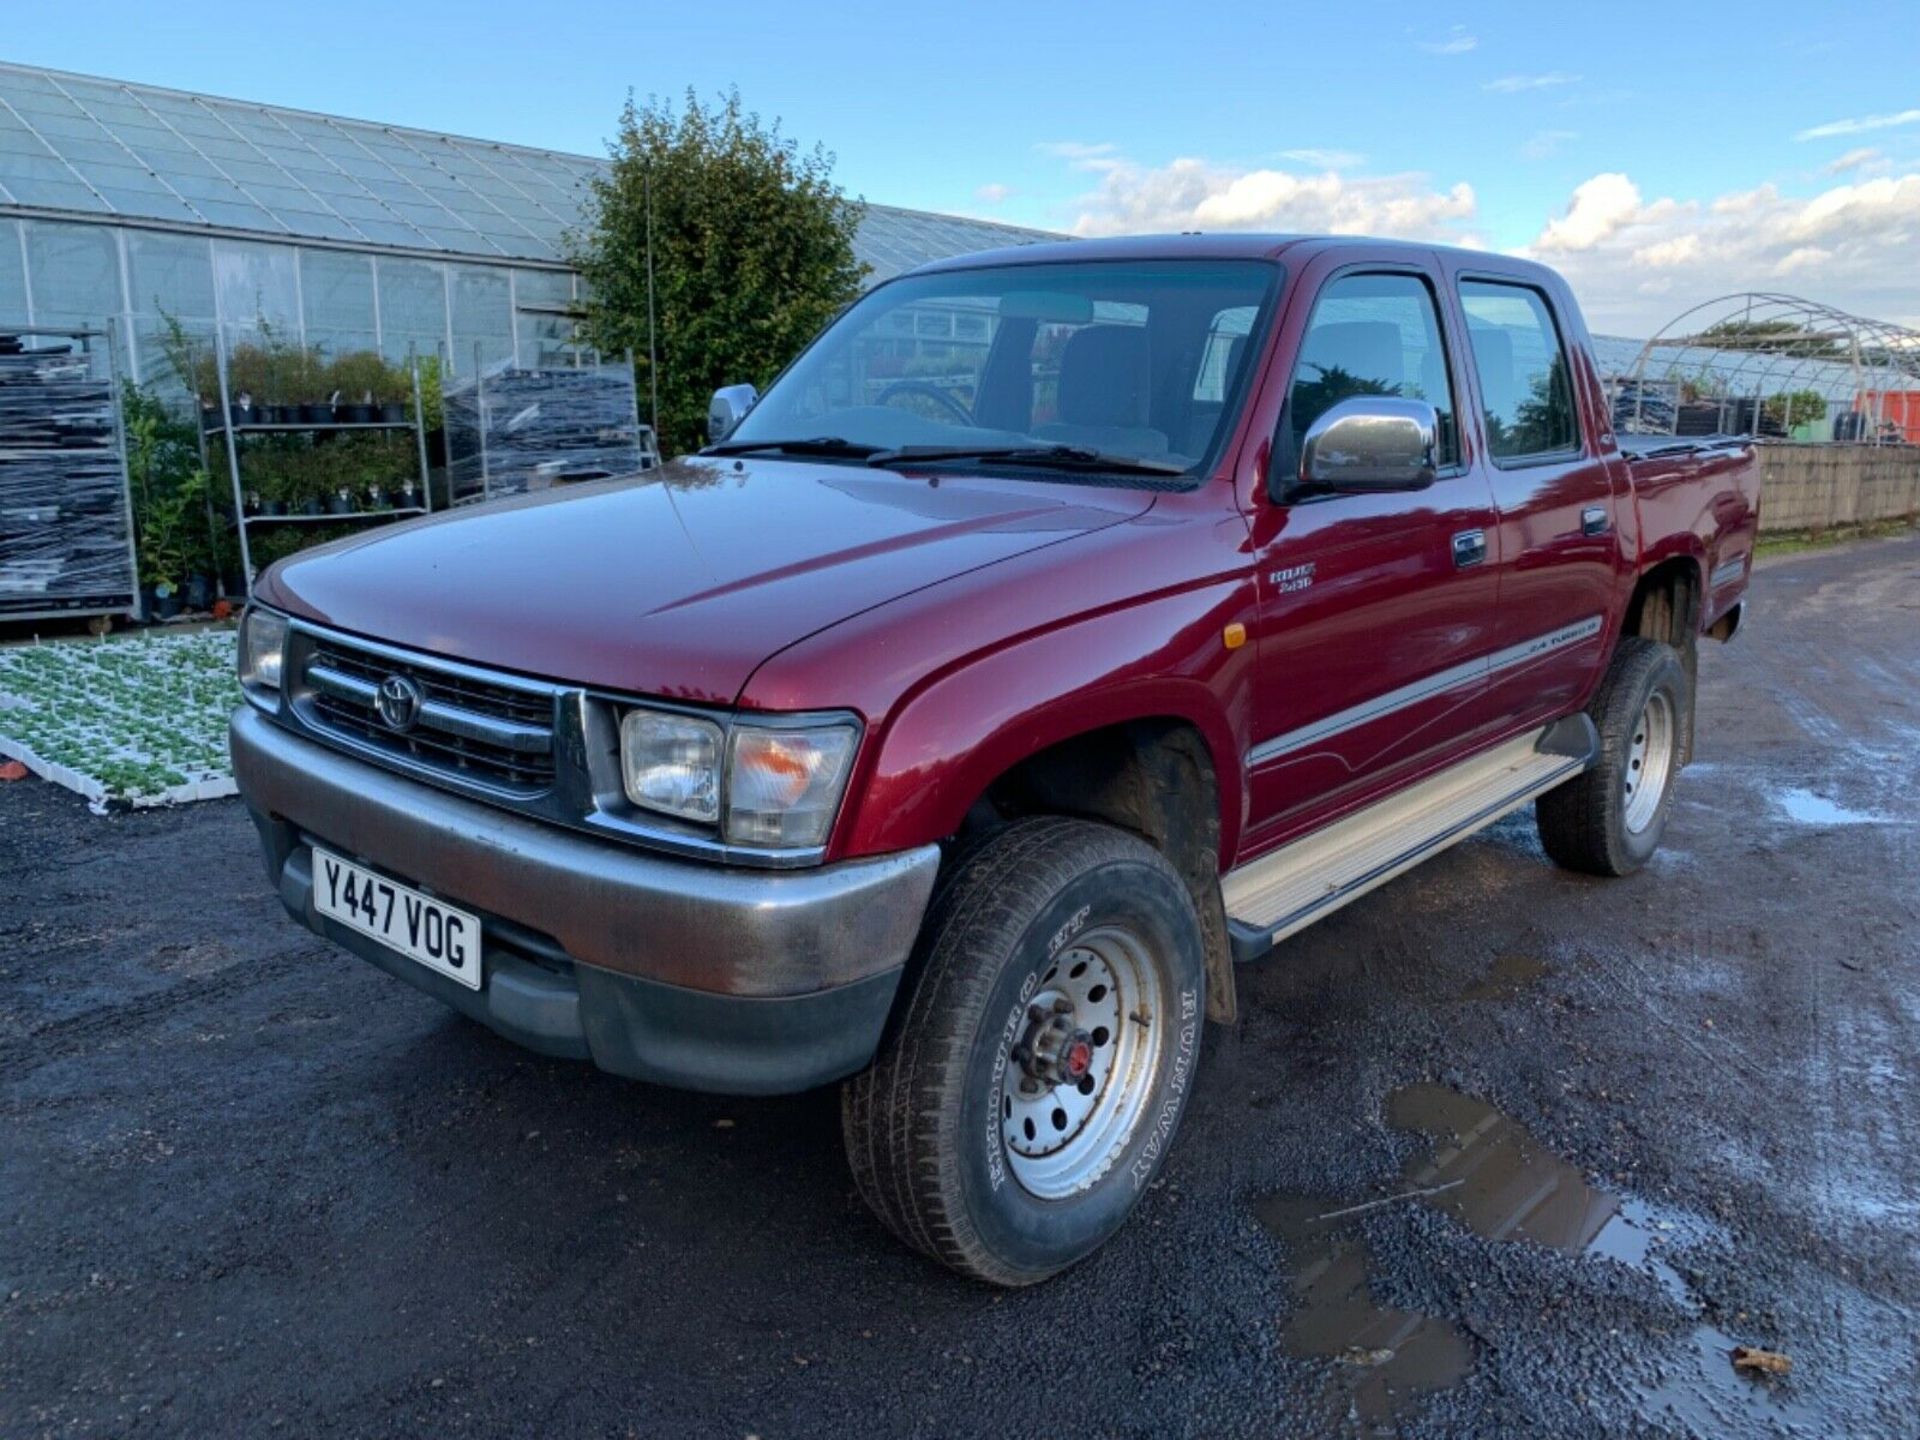 Toyota Hilux Pickup 4x4 - Image 2 of 12